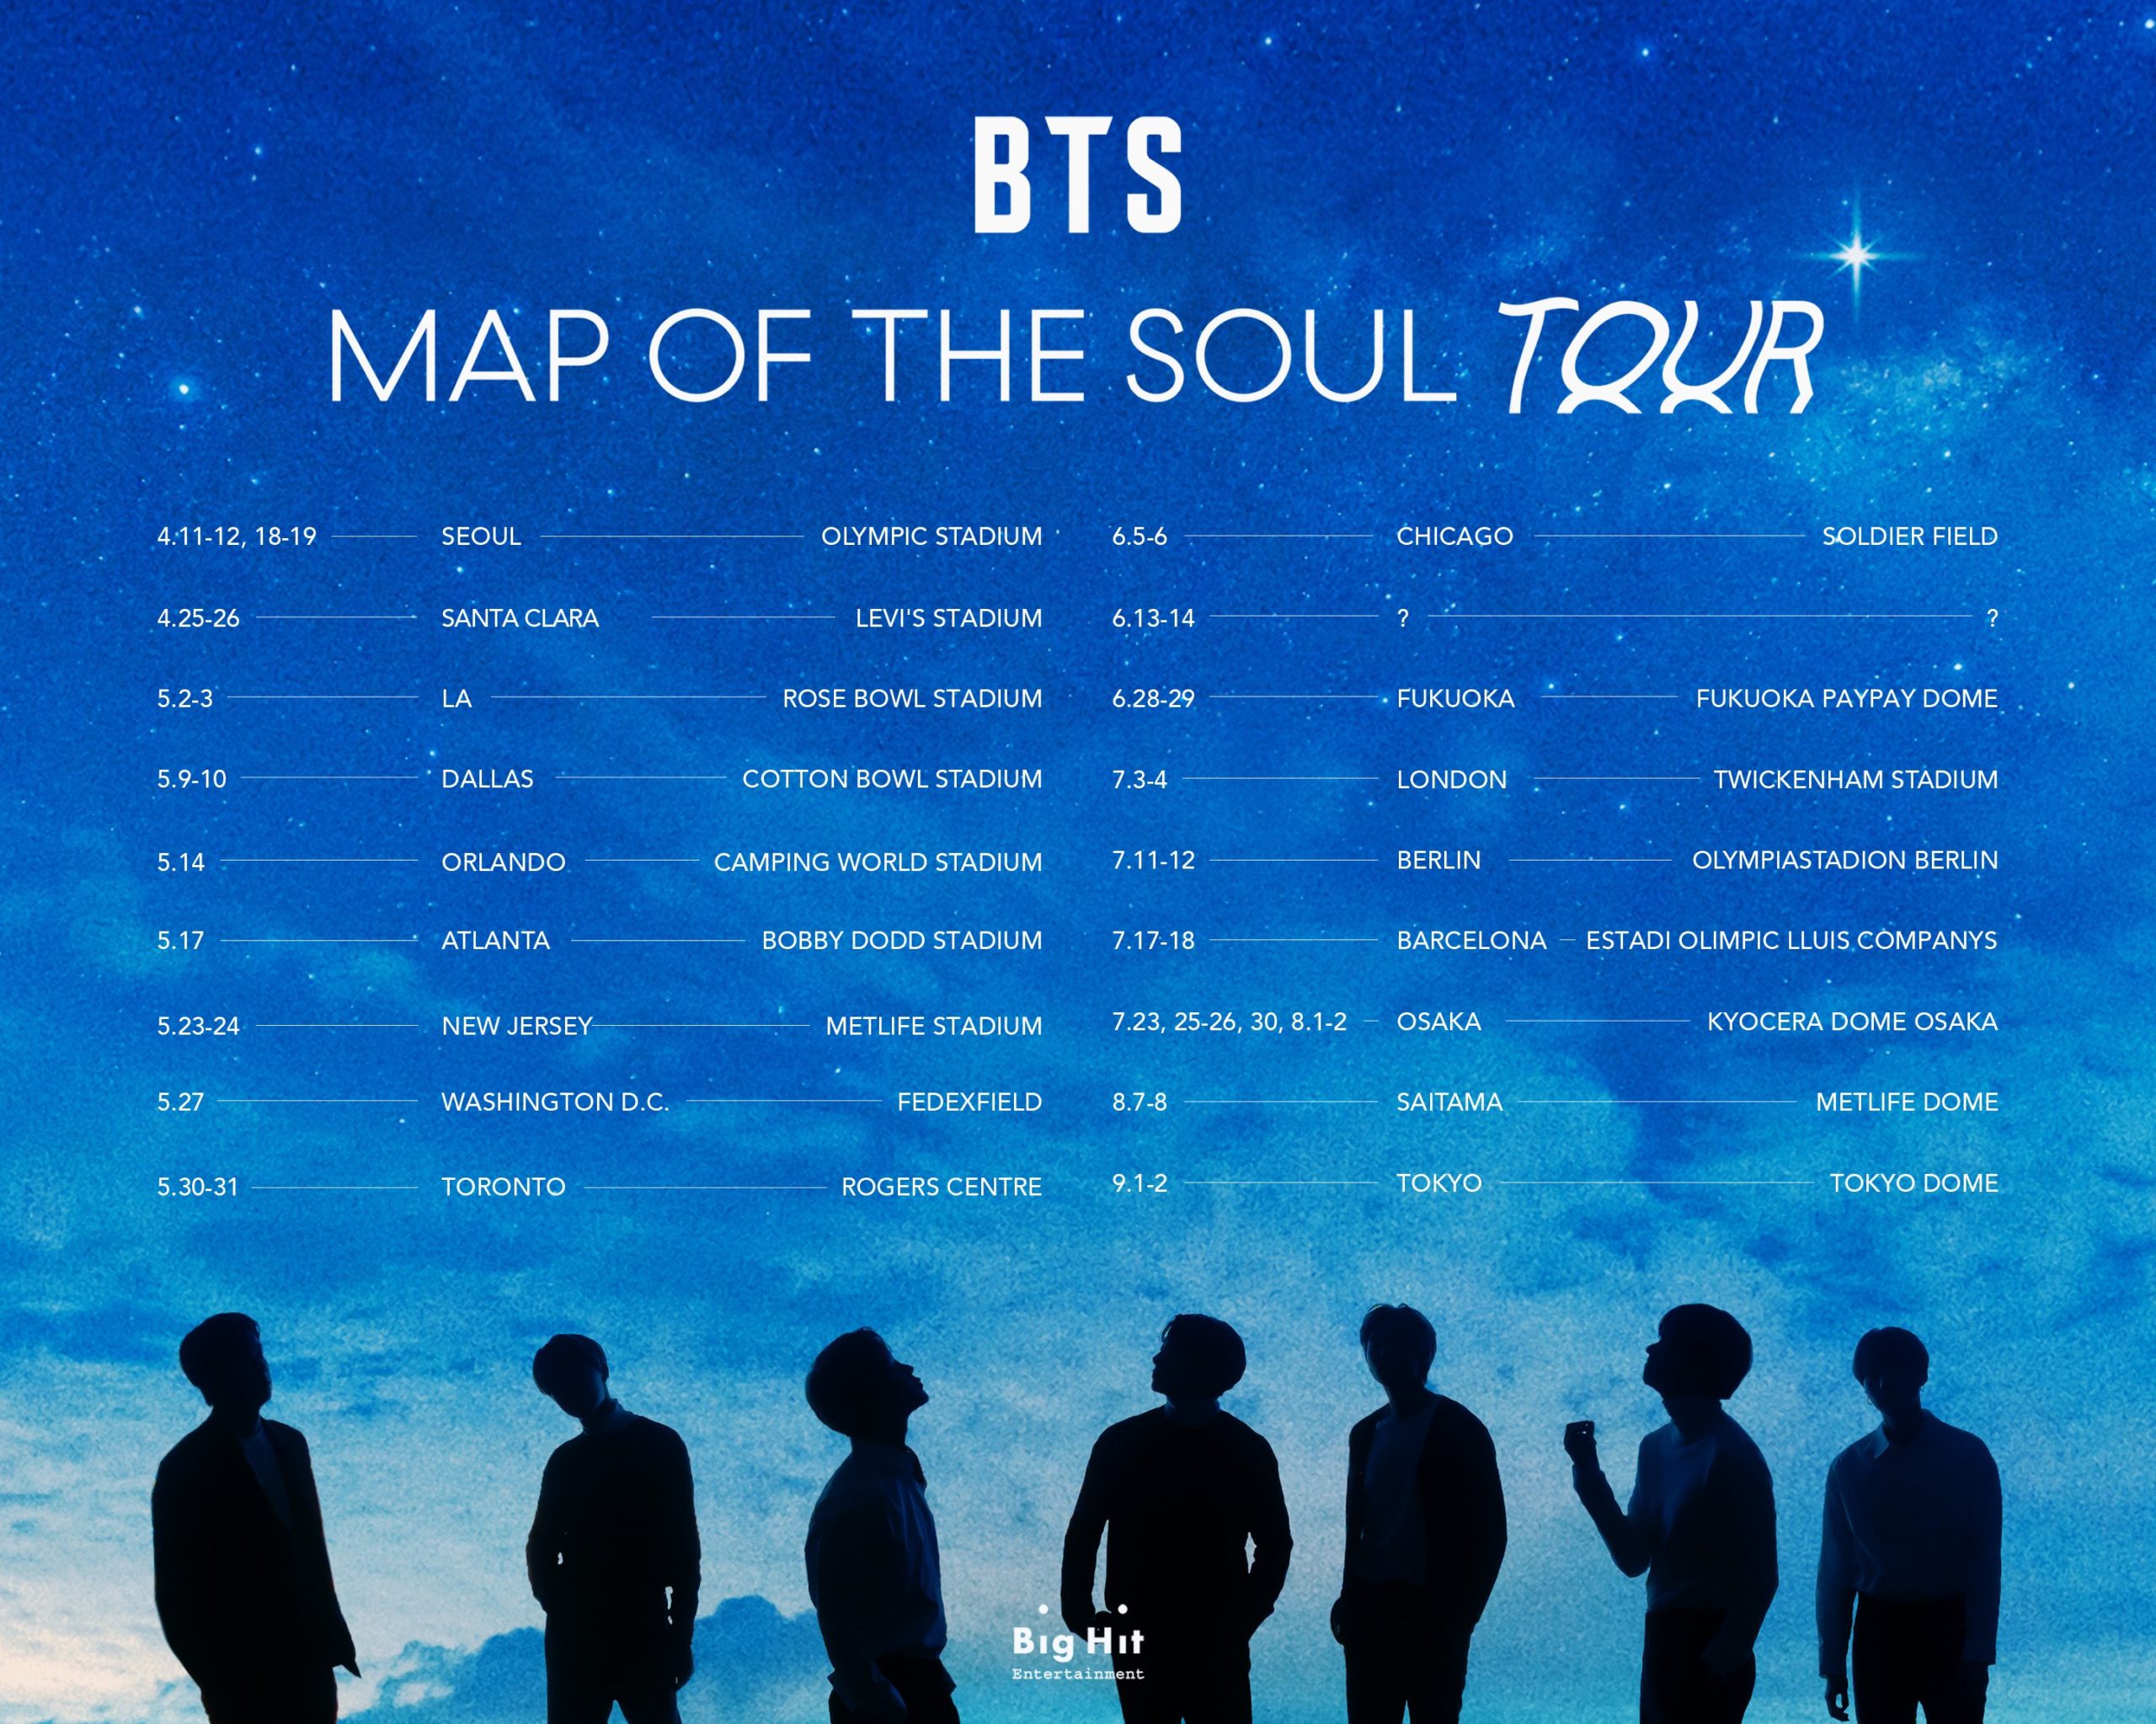 BTS Map Of The Soul Tour 2020: BTS Announces Dates and Locations of Their Upcoming ...